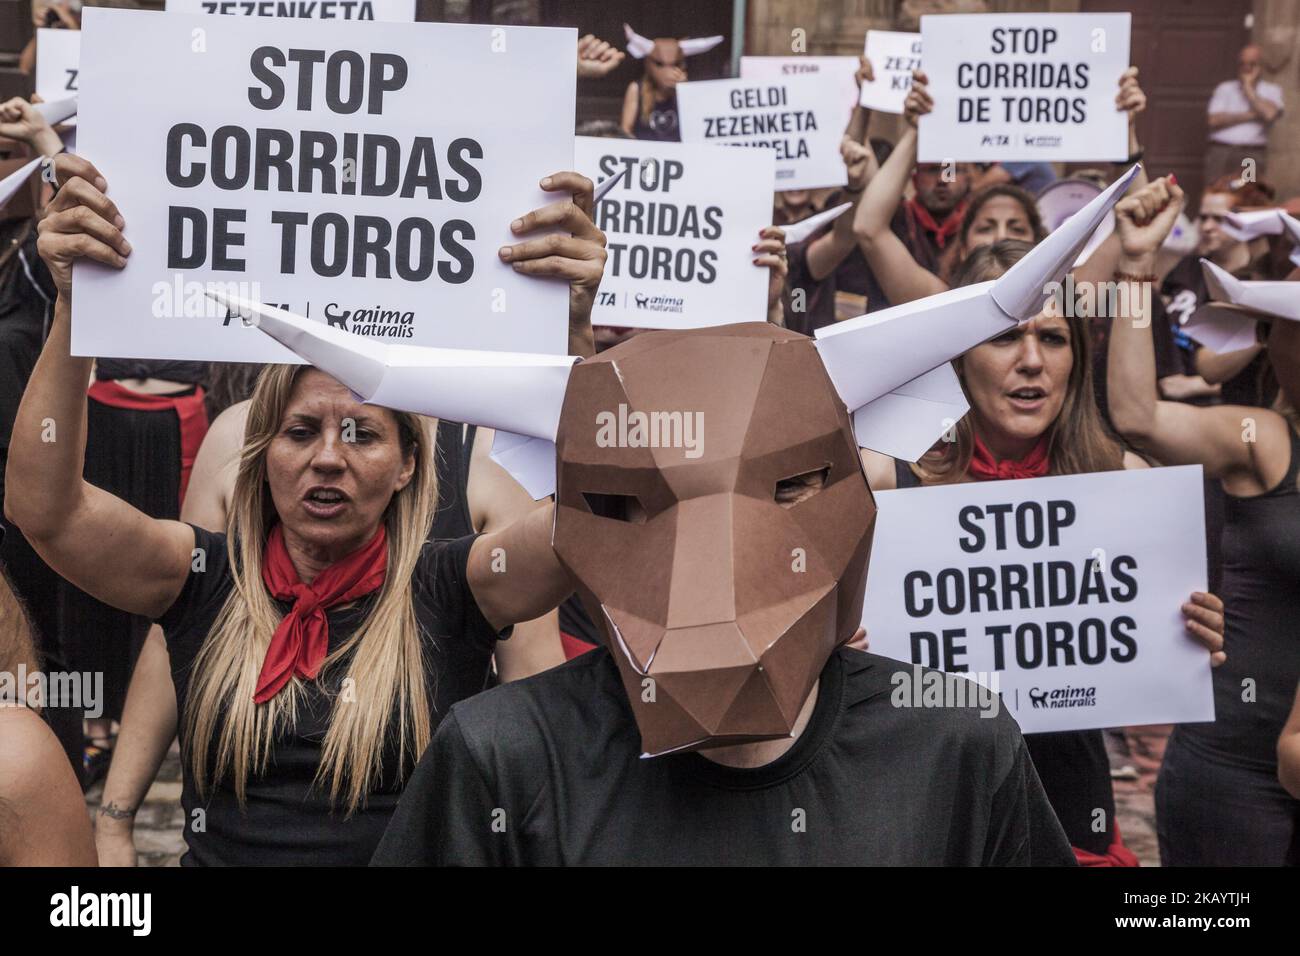 Protesters against animal cruelty in bull fightings before San Fermin celebrations in Pamplona, Spain. Banner says 'stop bullfightings' and some activists wear a paperboard bullhead mask. (Photo by Celestino Arce/NurPhoto) Stock Photo